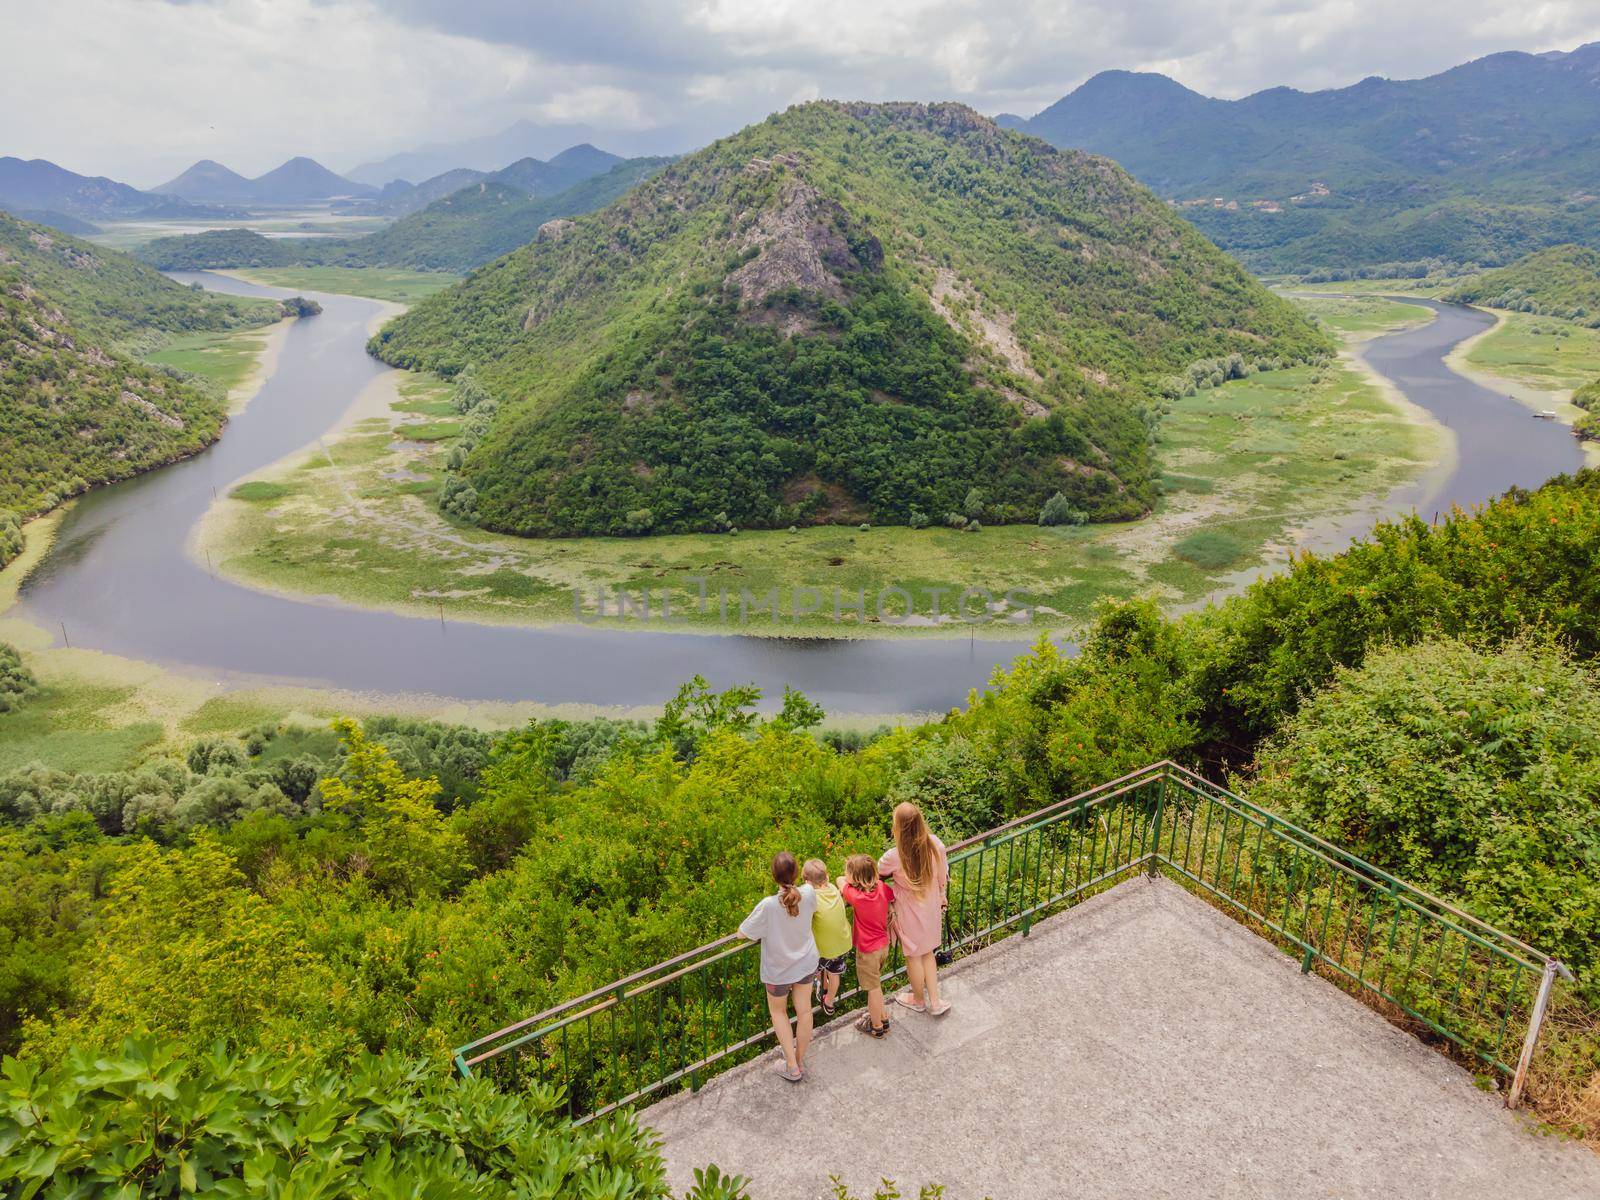 Tourists in the background Canyon of Rijeka Crnojevica river near the Skadar lake coast. One of the most famous views of Montenegro. River makes a turn between the mountains and flows backward by galitskaya